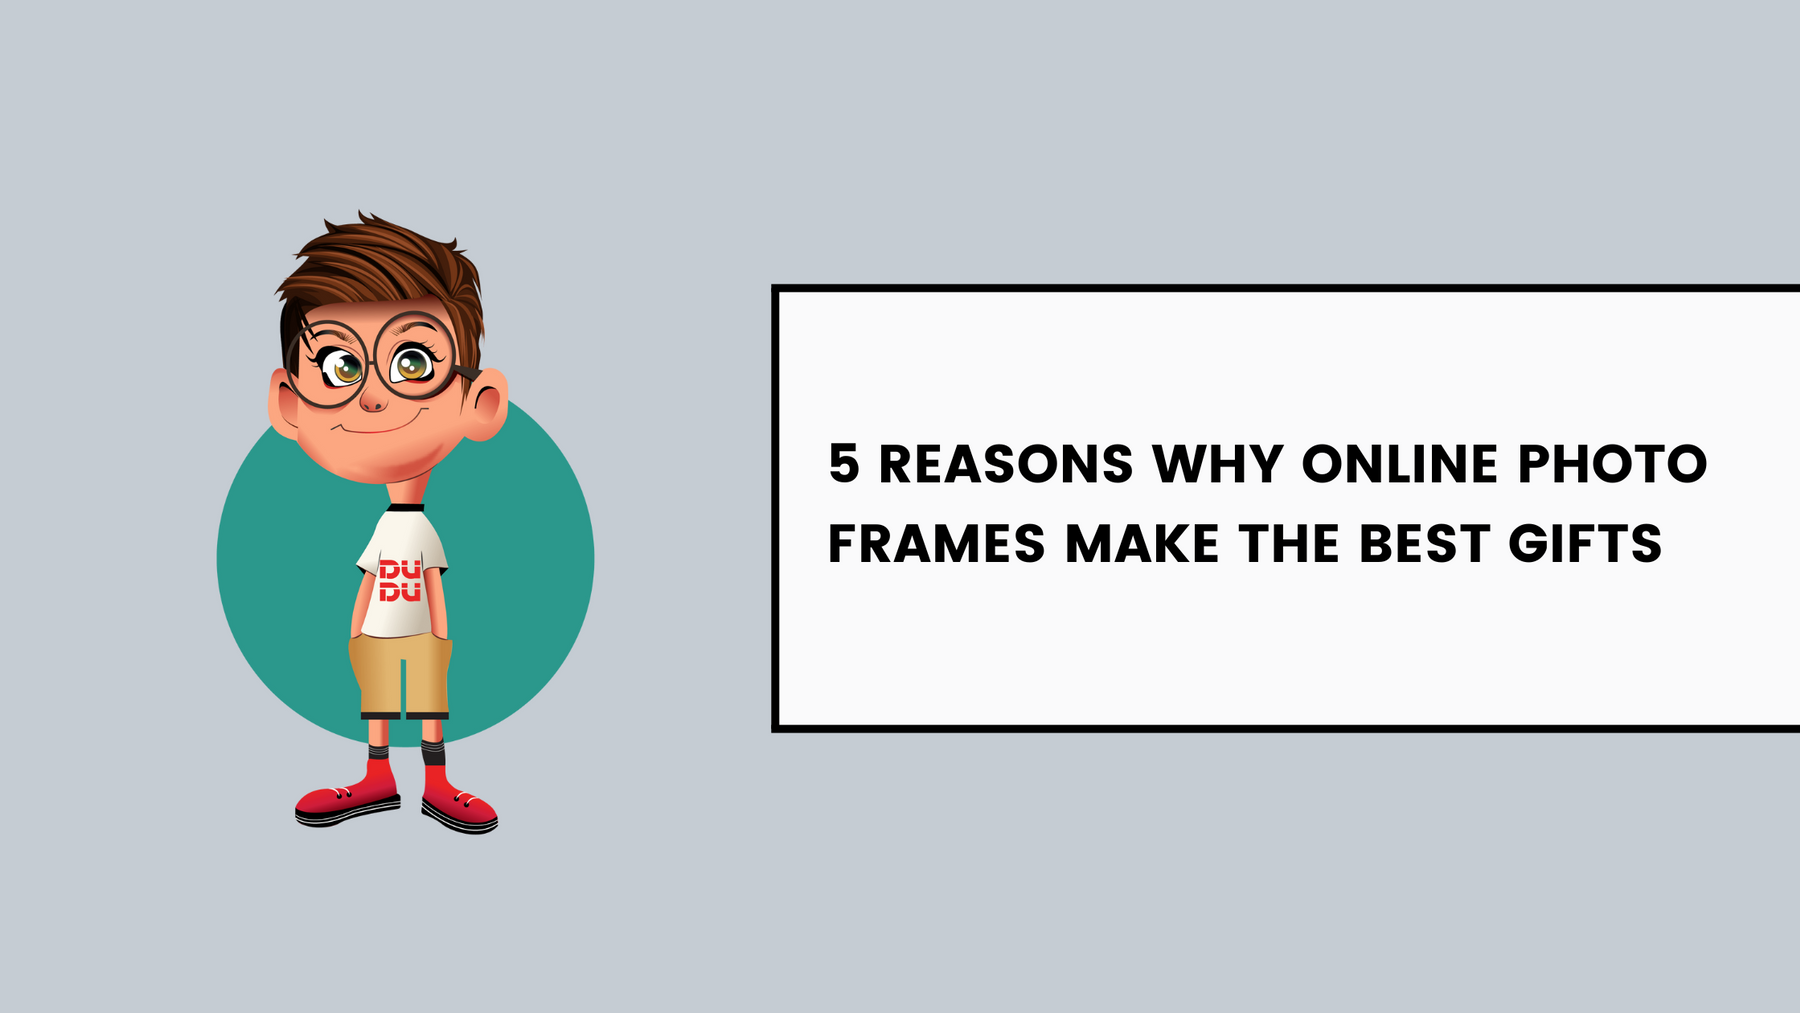 5 Reasons Why Online Photo Frames Make the Best Gifts